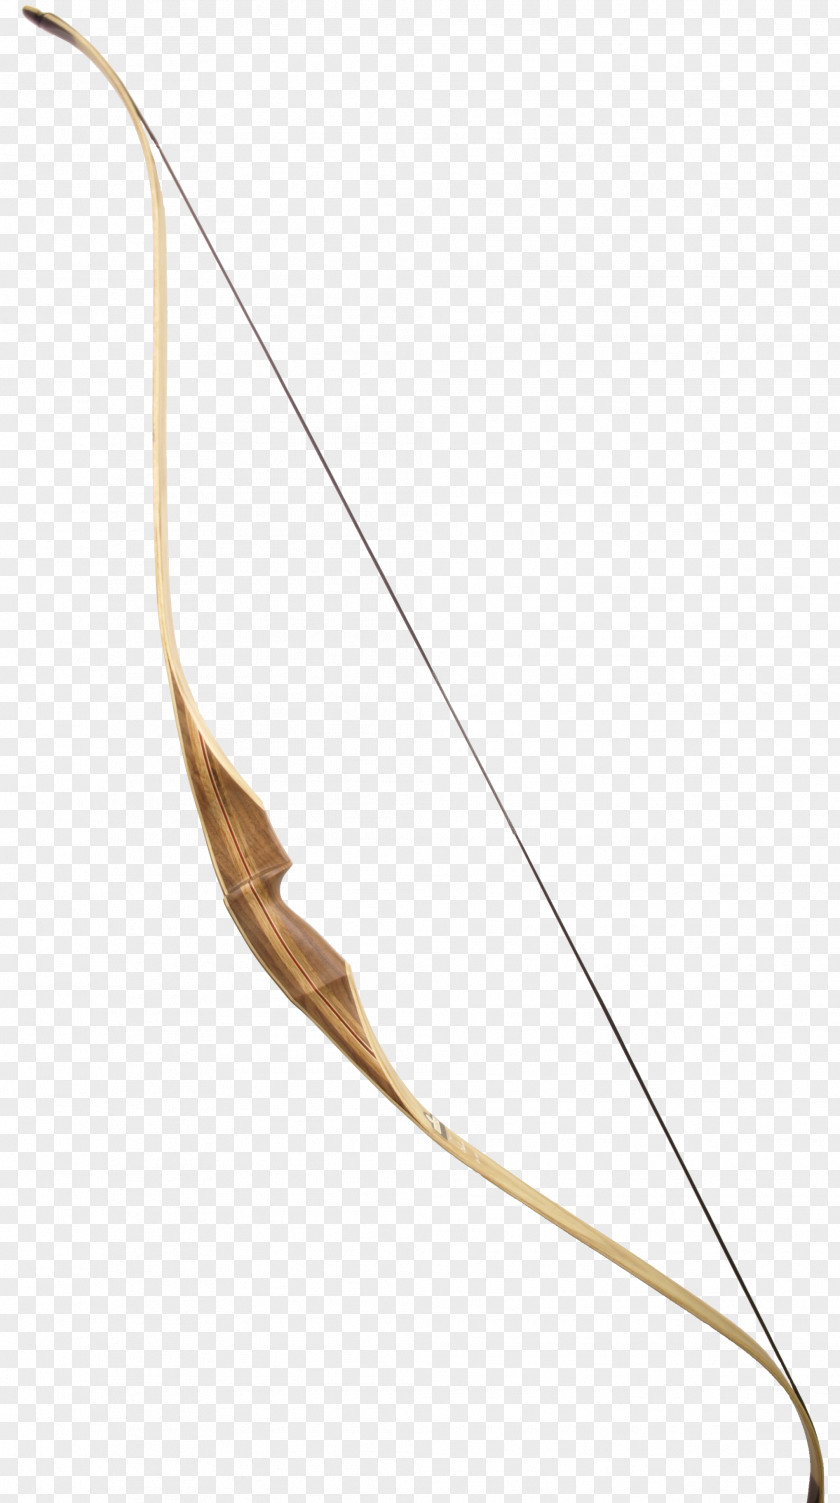 Weapon Longbow Ranged Bow And Arrow PNG